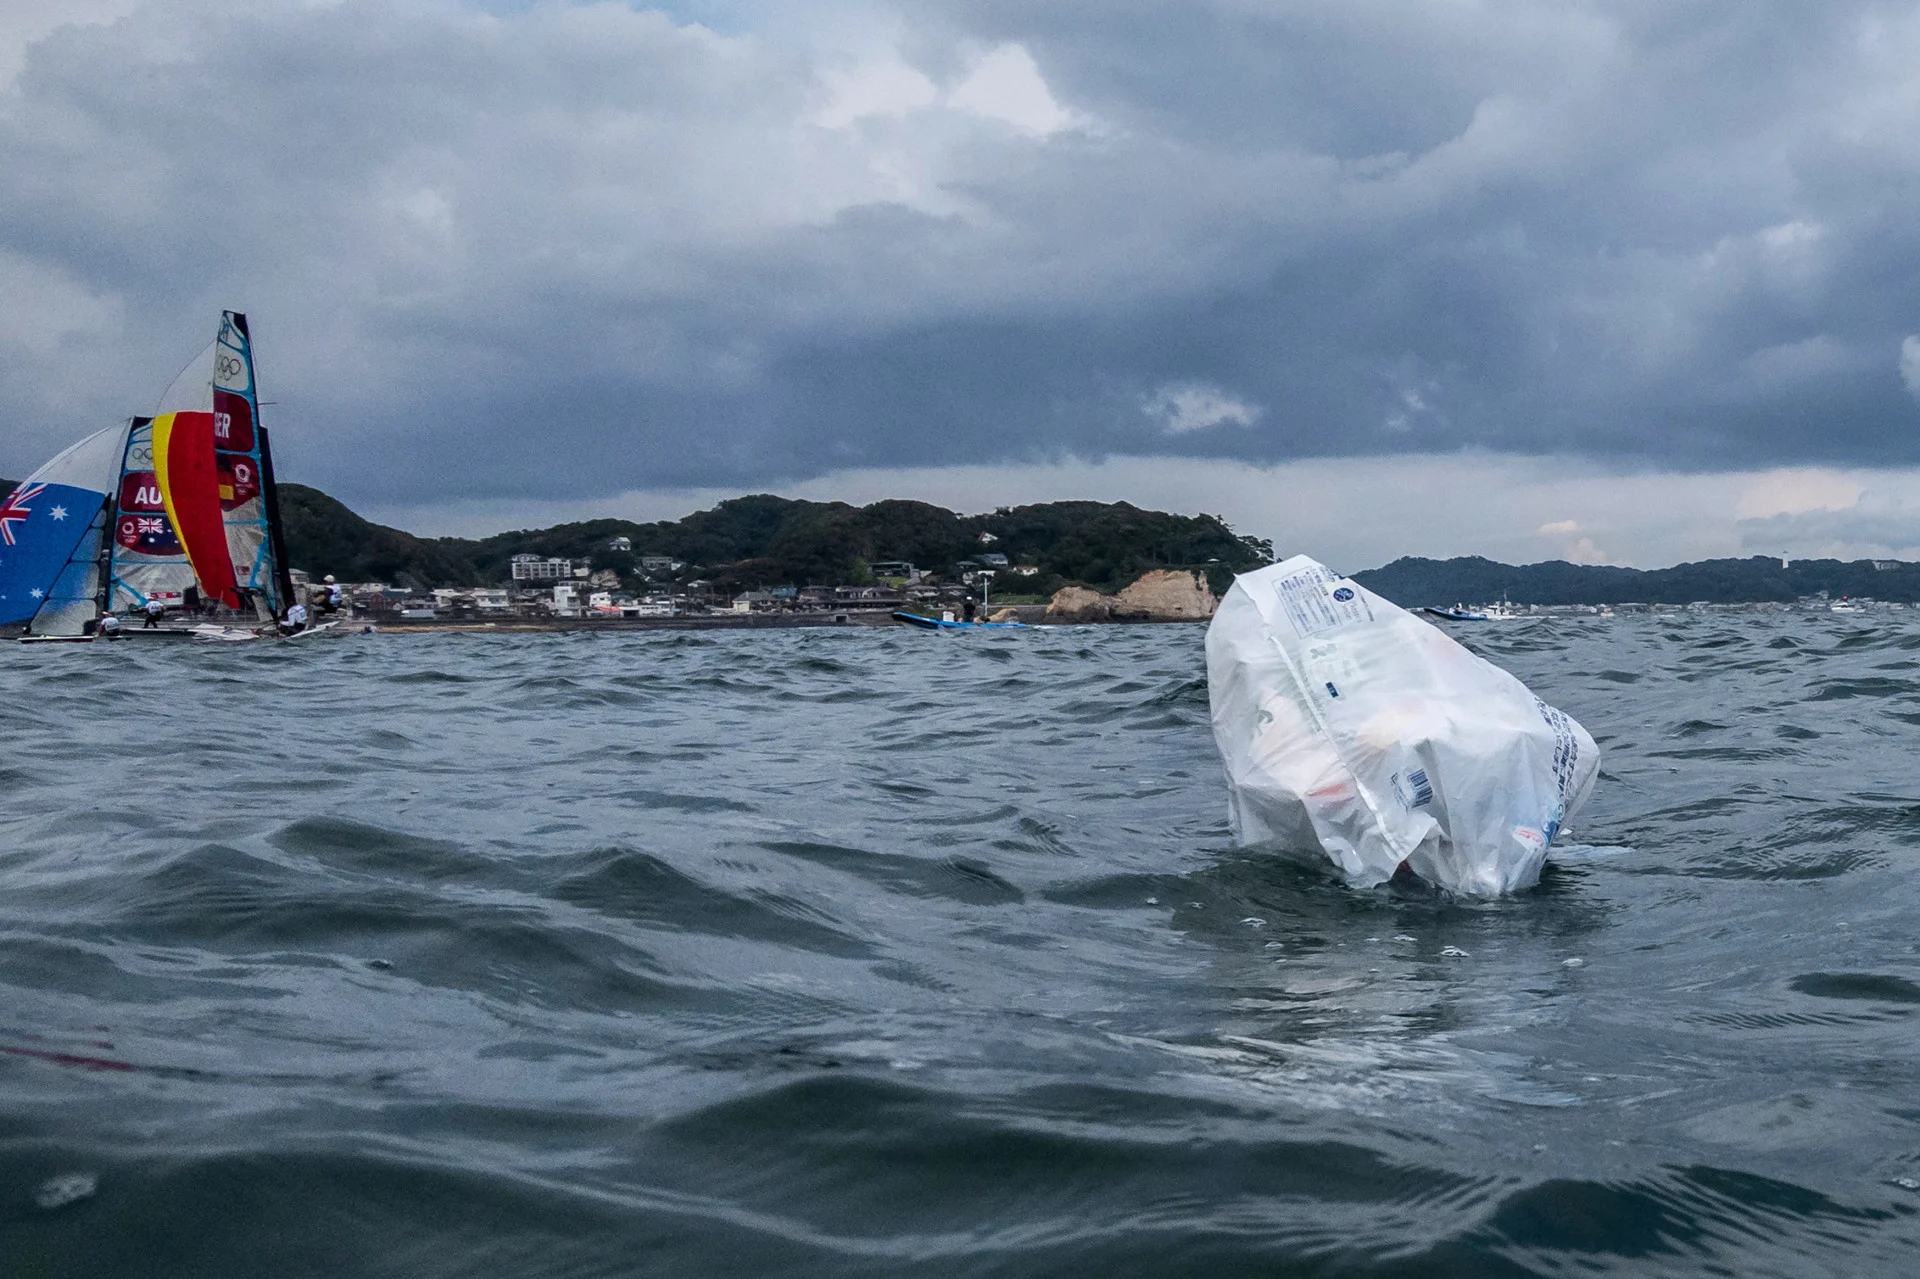 Reuters: FILE PHOTO: Tokyo 2020 Olympics. A plastic bag containing trash floats on the water as competitors warm up for their race. REUTERS/Carlos Barria